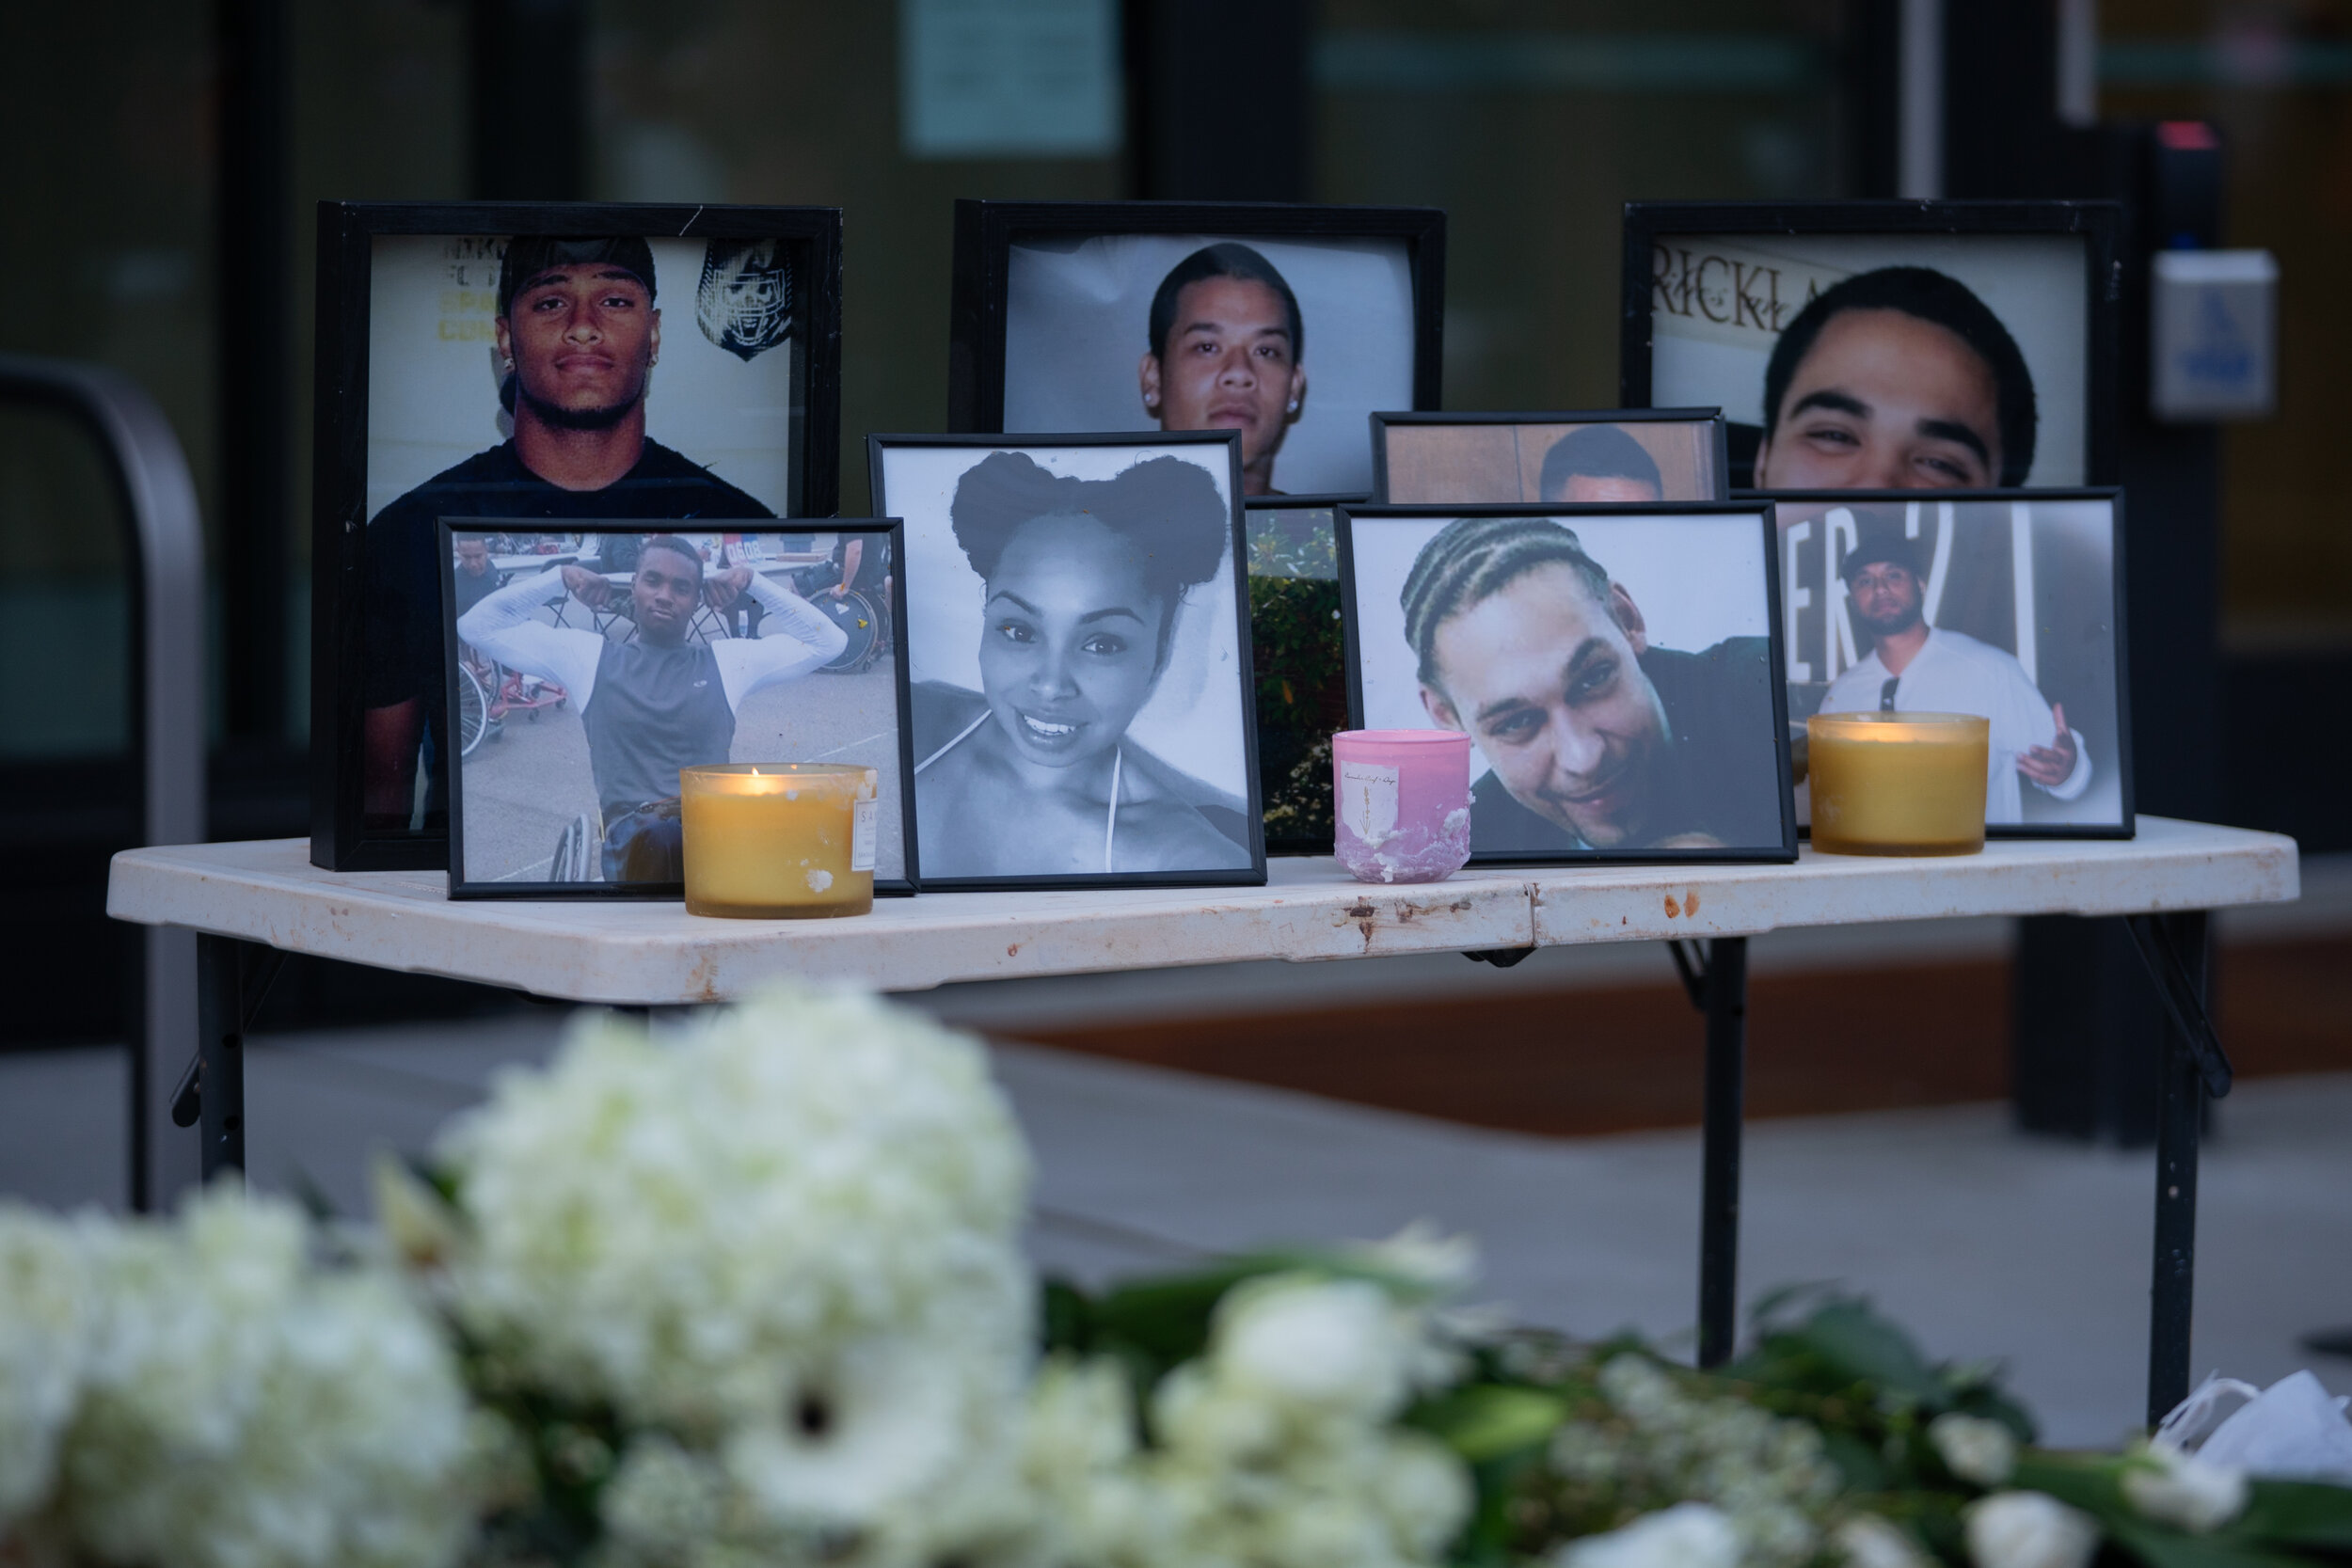  A shrine for Dolal Idd and other victims of police violence is seen at a community vigil organized by youth activists on Jan 13, 2021 in Tukwila, Wash. 